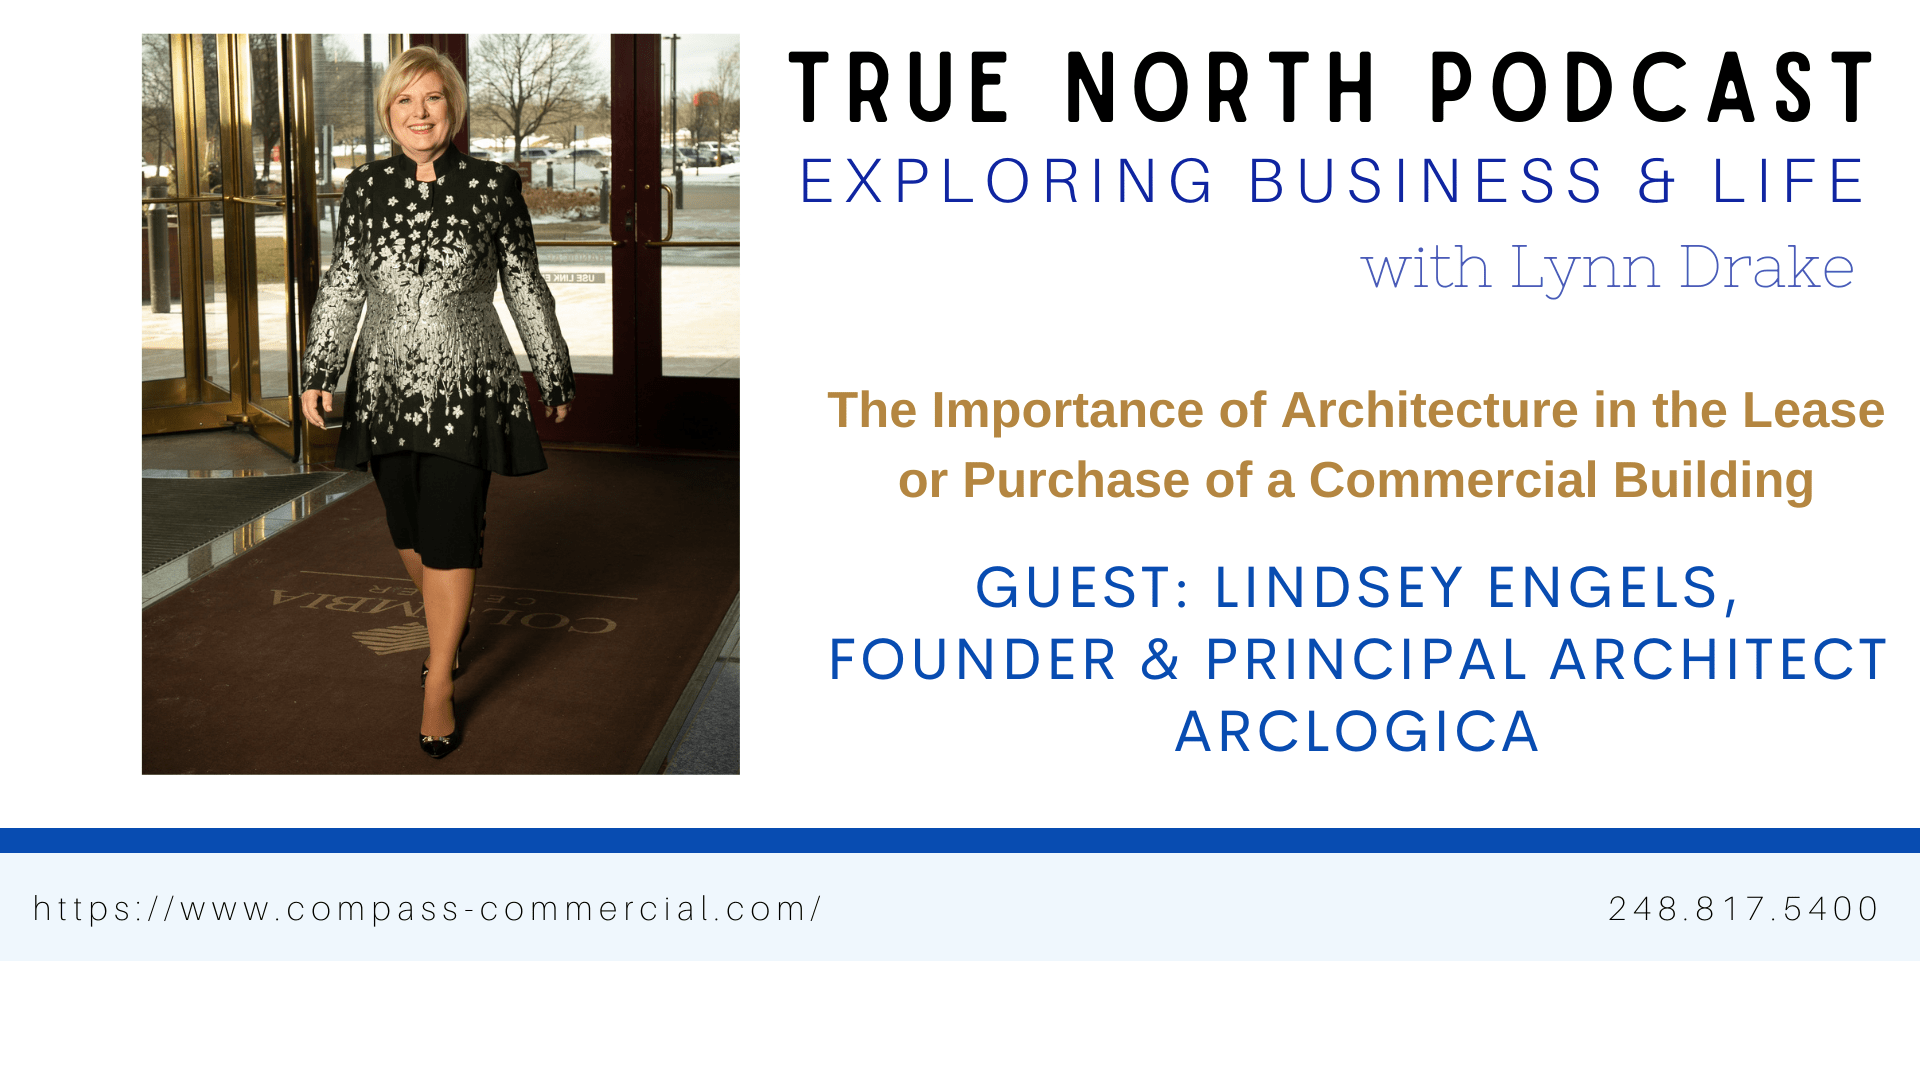 Lindsey Engels, Architecture, TNP Podcast 11.18.21